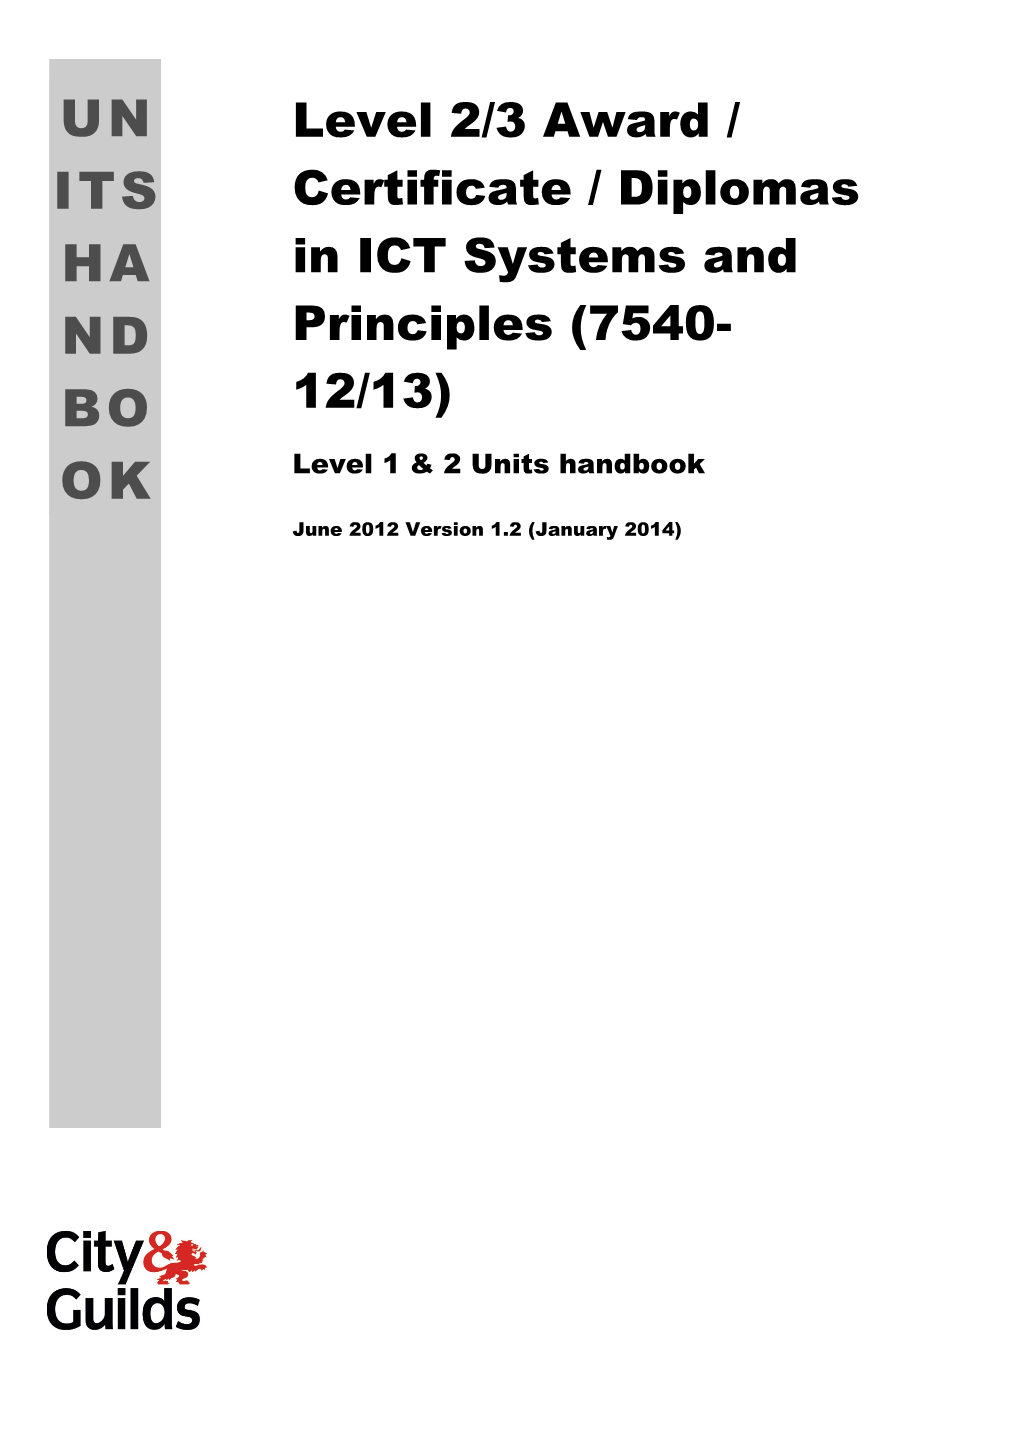 Level 2/3 Award / Certificate / Diplomas In ICT Systems And Principles (7540-12/13)